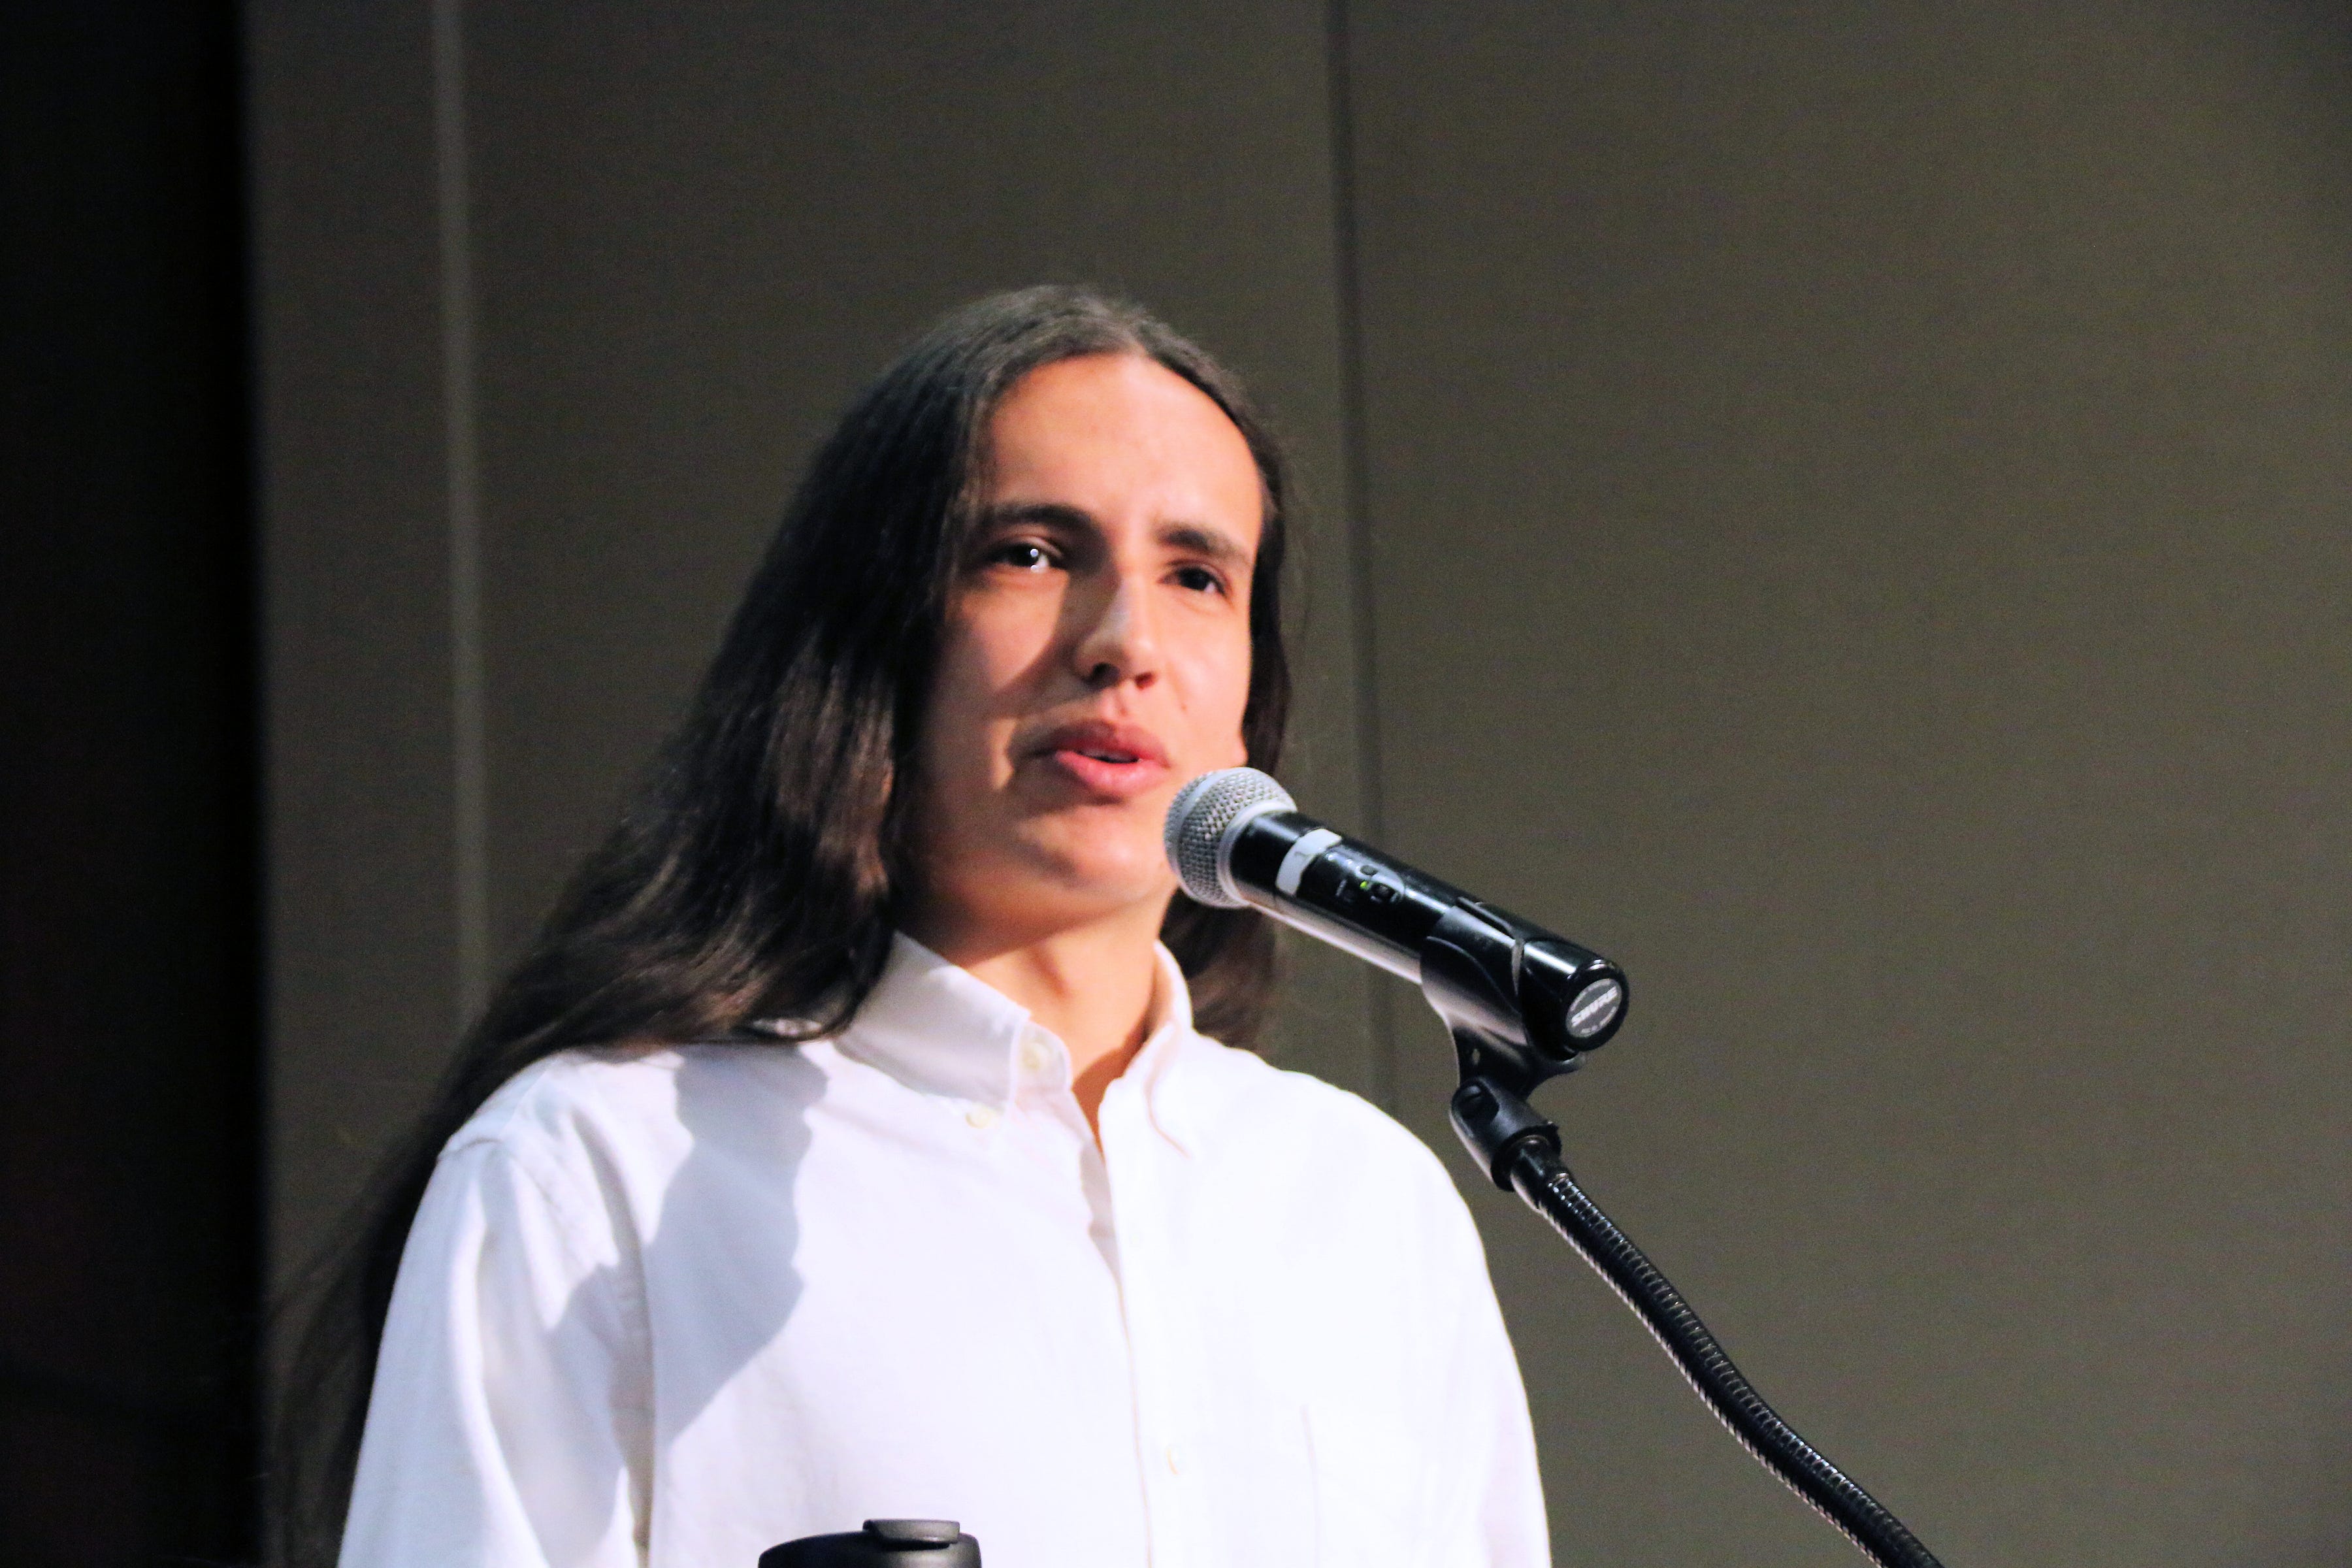 Xiuhtezcatl Martinez, a 19-year-old climate activist and hip-hop artist speaks at the conference “Climate 2020: Seven Generations for Arizona” at Northern Arizona University in Flagstaff on Nov. 15, 2019.